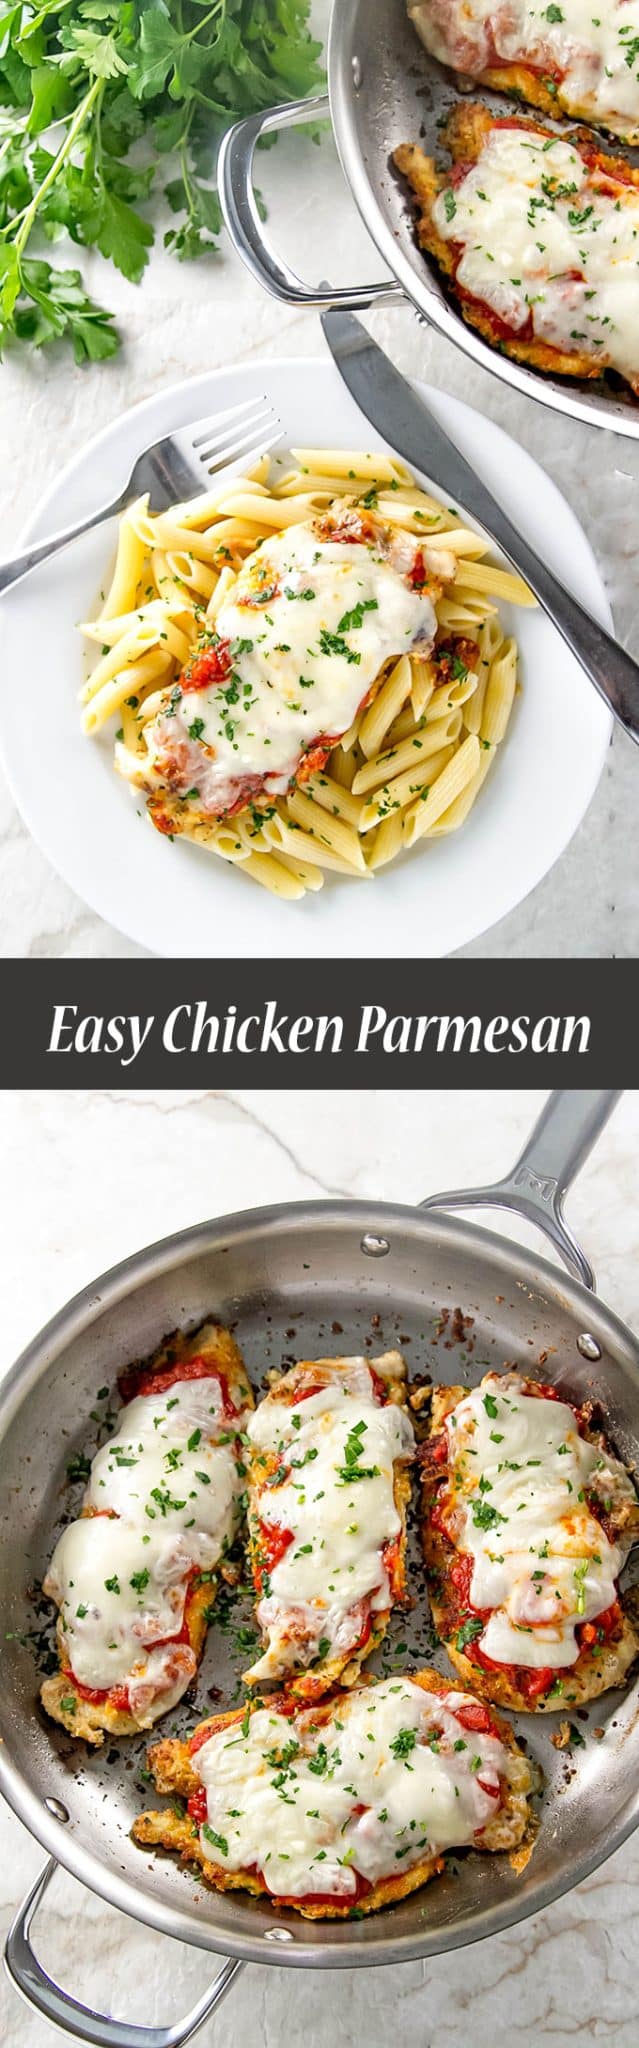 Easy chicken parmesan made in one skillet | girlgonegourmet.com